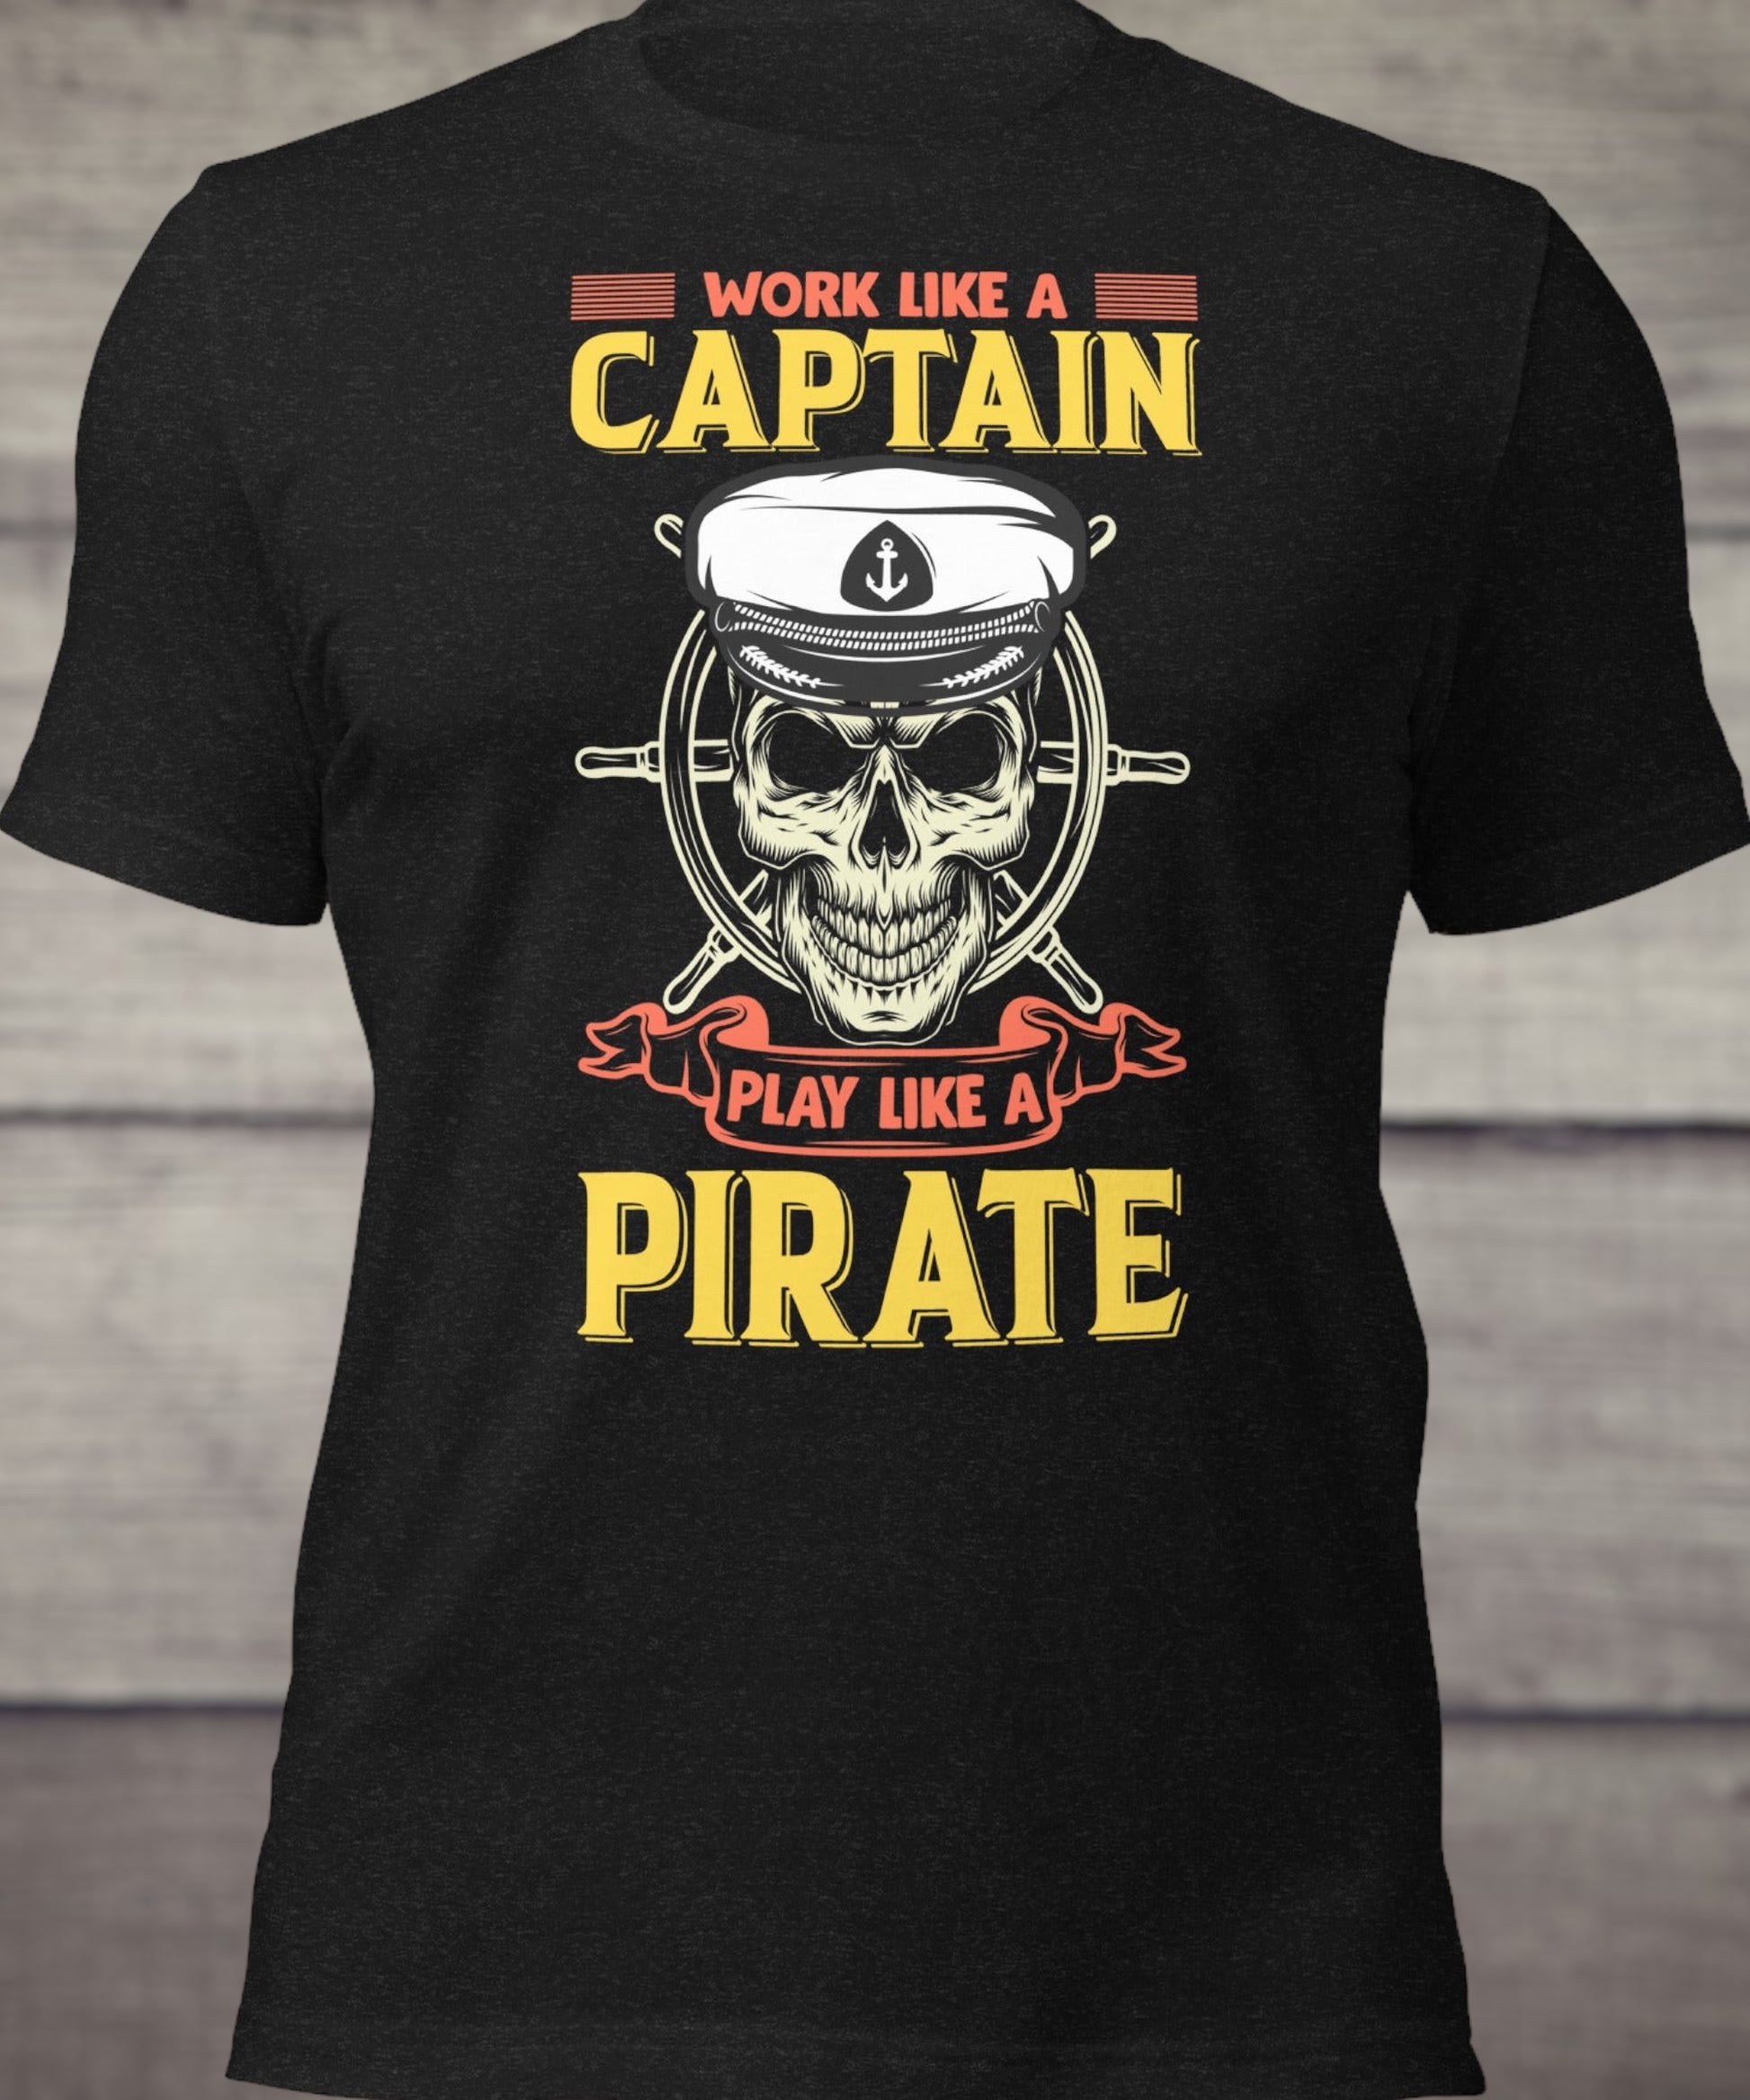 "Work Like A Captain, Play Like A Pirate" T-Shirt - Weave Got Gifts - Unique Gifts You Won’t Find Anywhere Else!